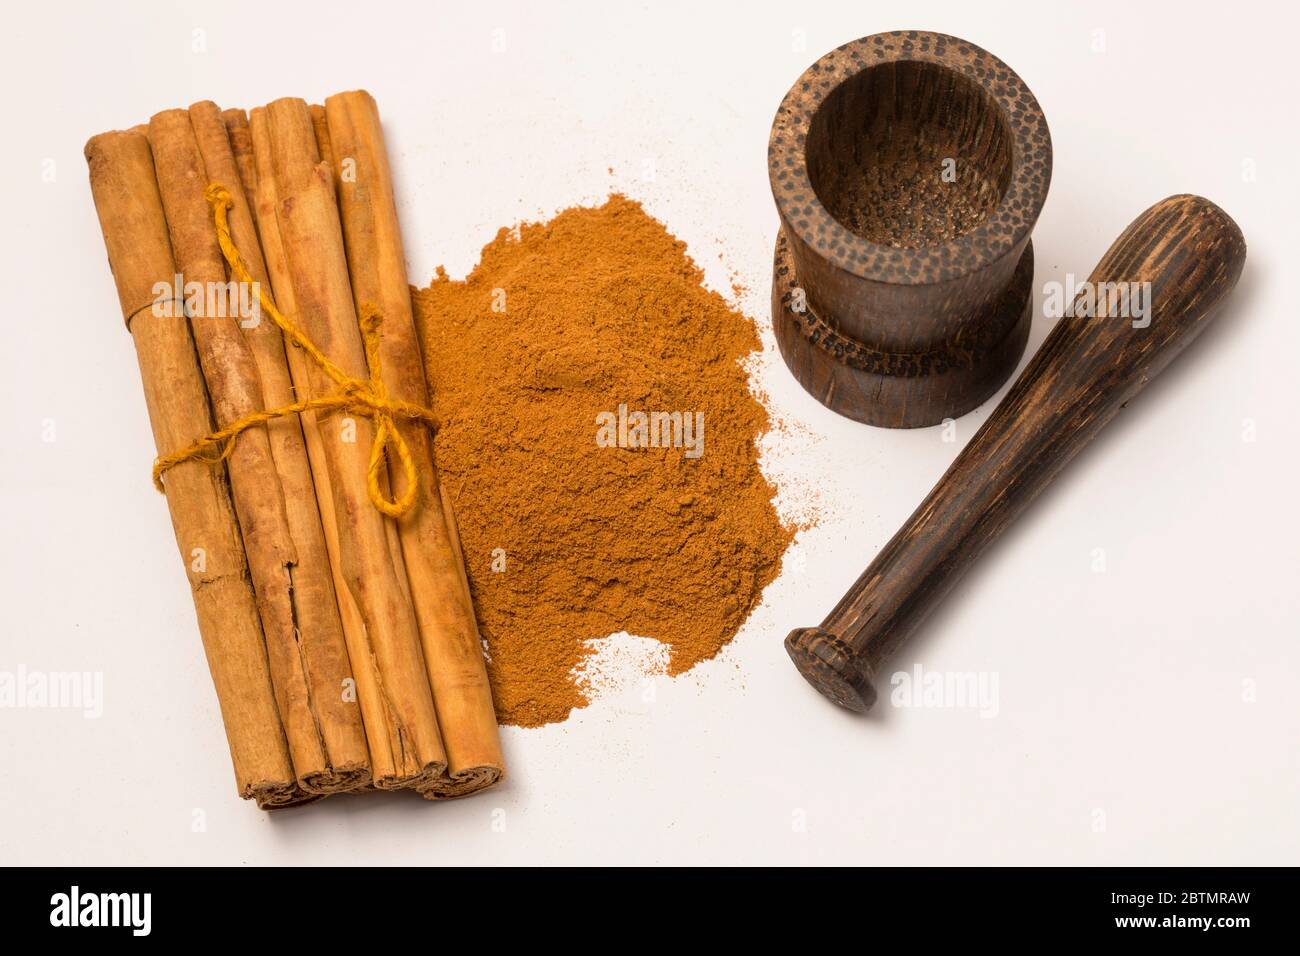 Close-up view of cinnamon sticks and powder on white background. Stock Photo